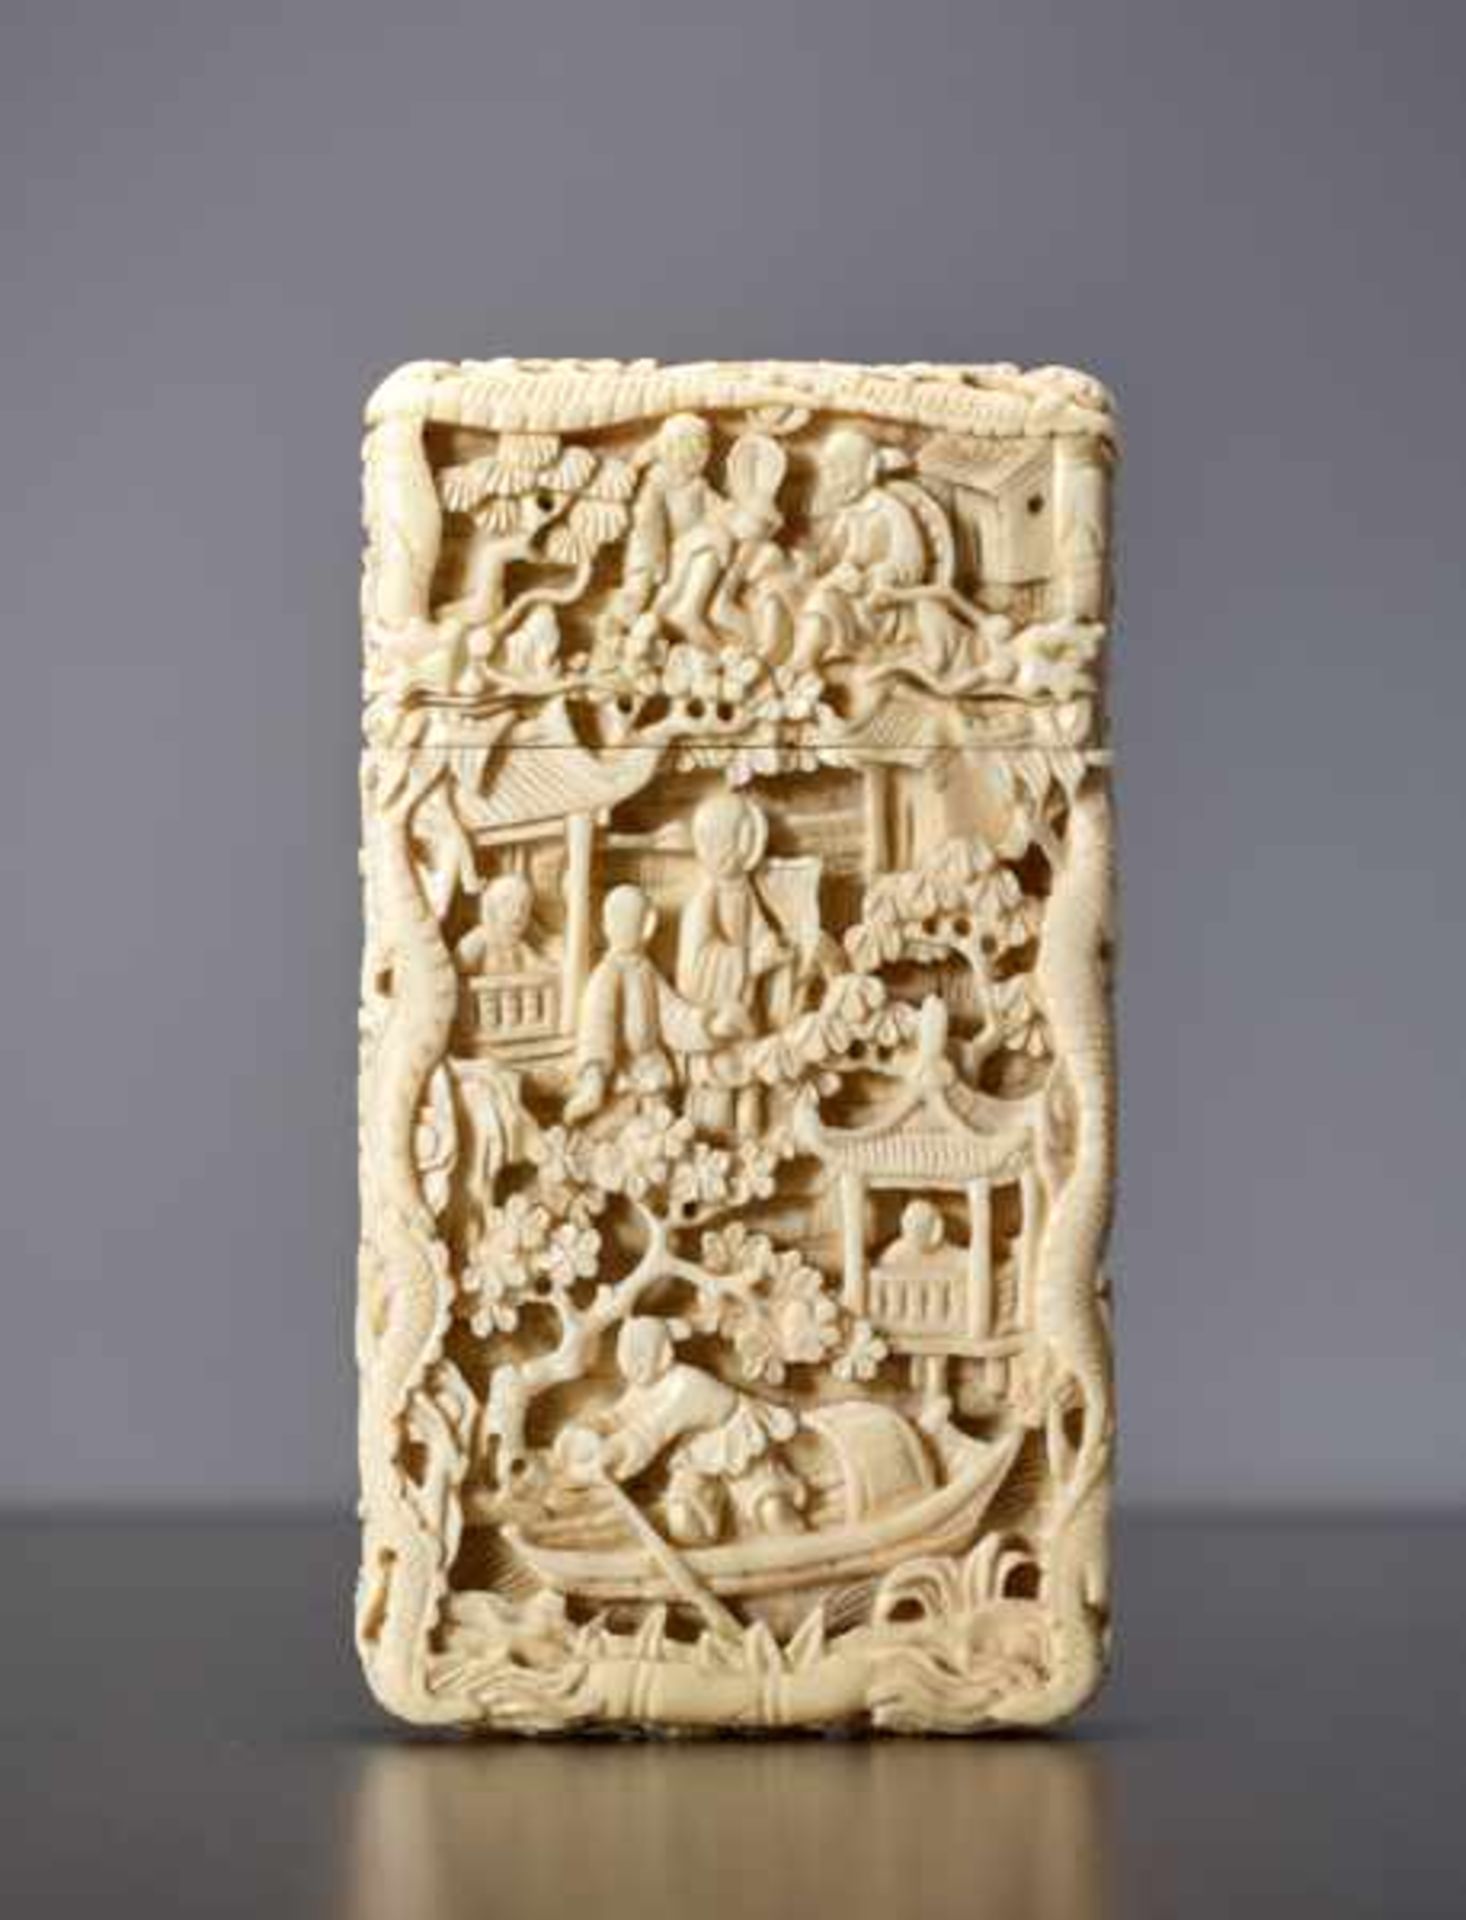 BUSINESS CARD CASE Ivory. China, late Qing dynasty (1644-1911)Rectangular form, the intricately